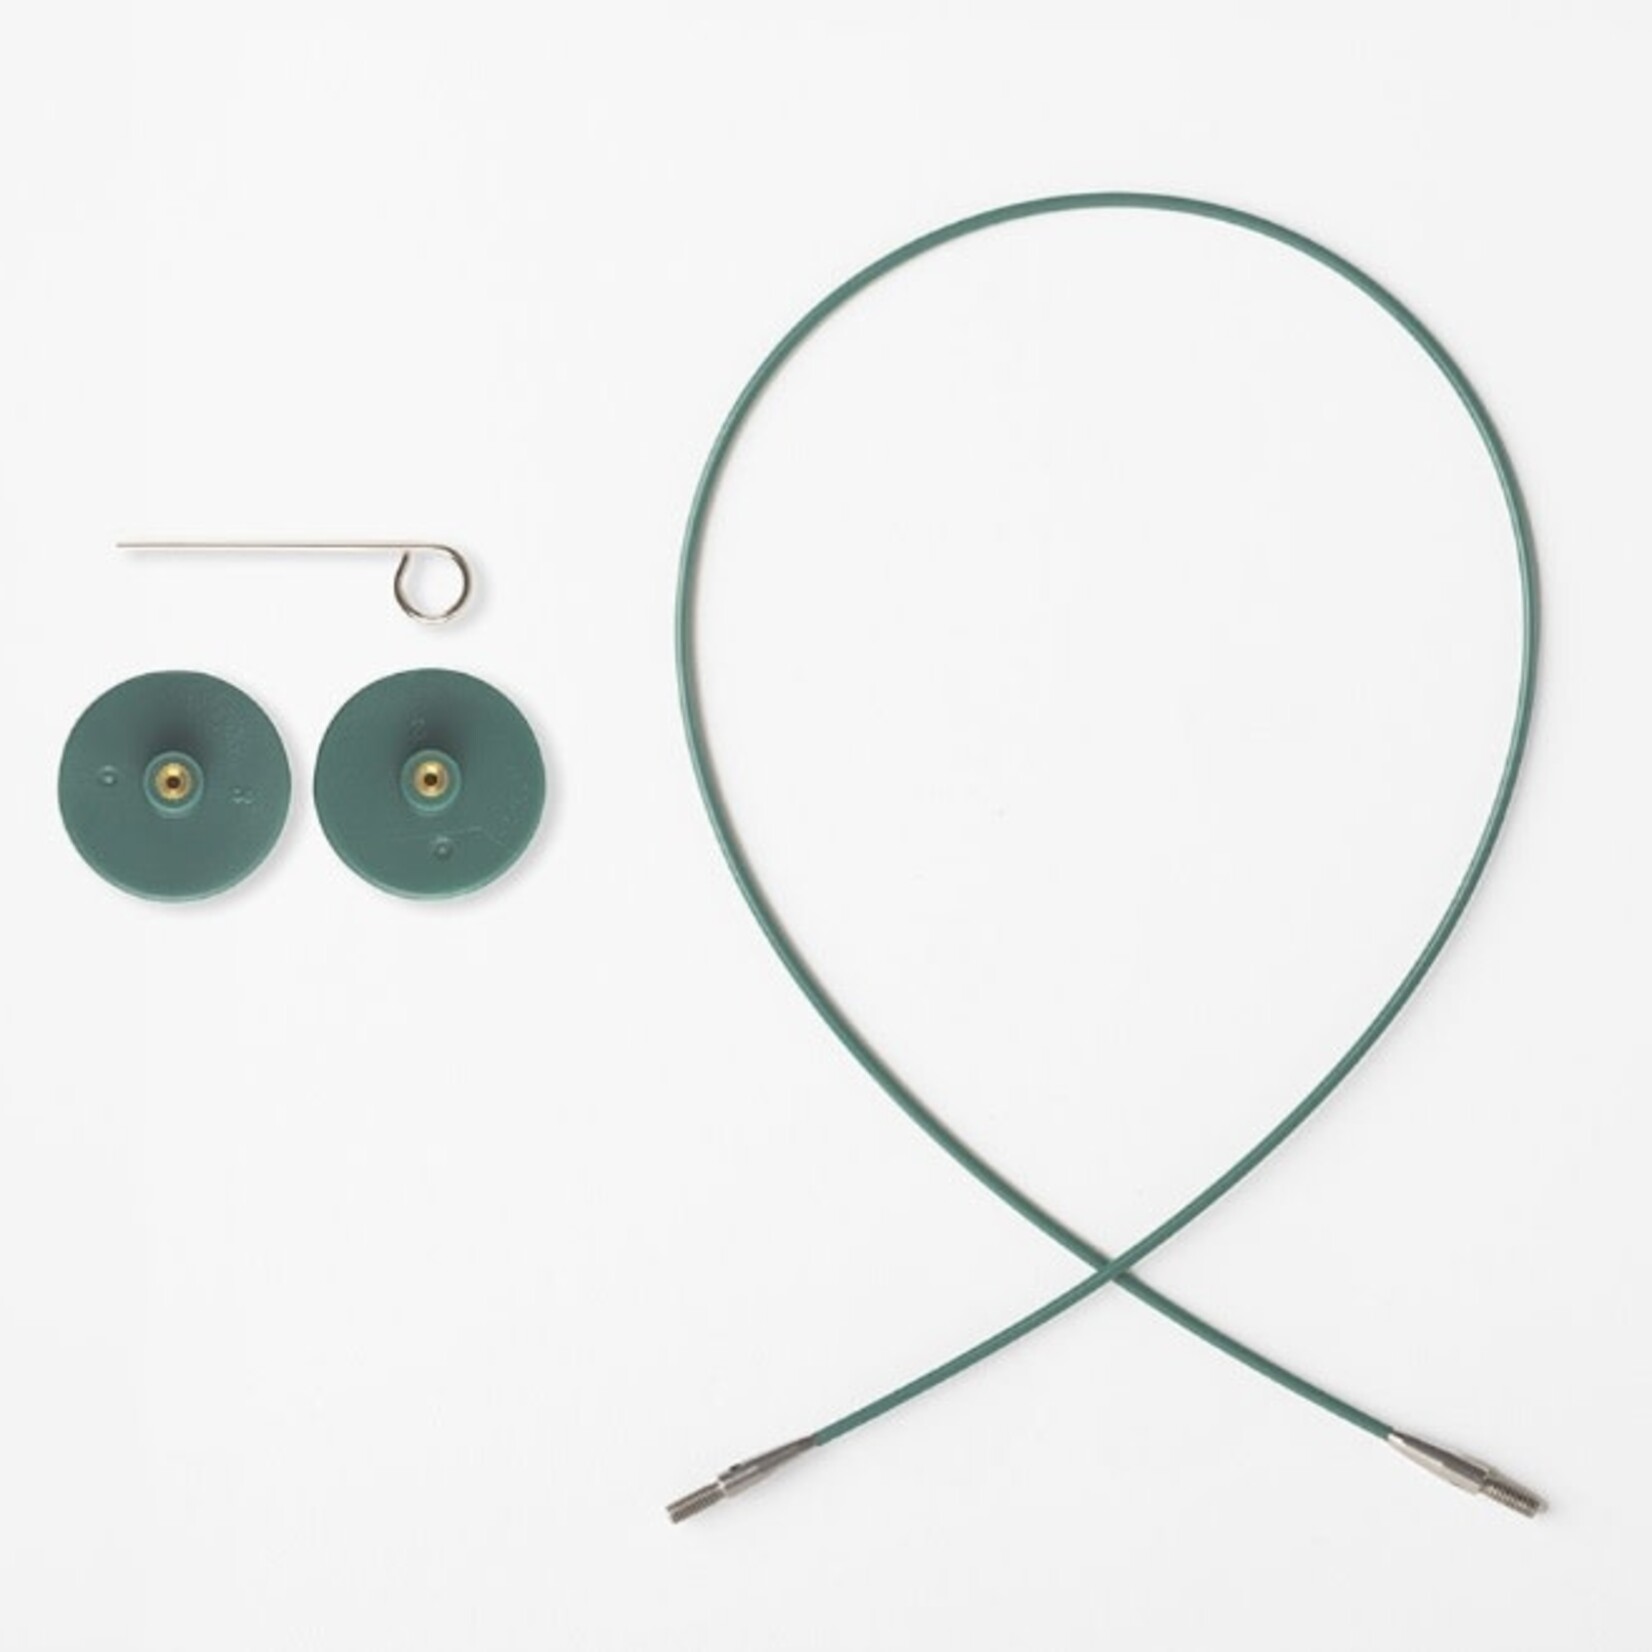 Knit Picks KNIT PICKS Interchangeable Circular Knitting Needle Cables